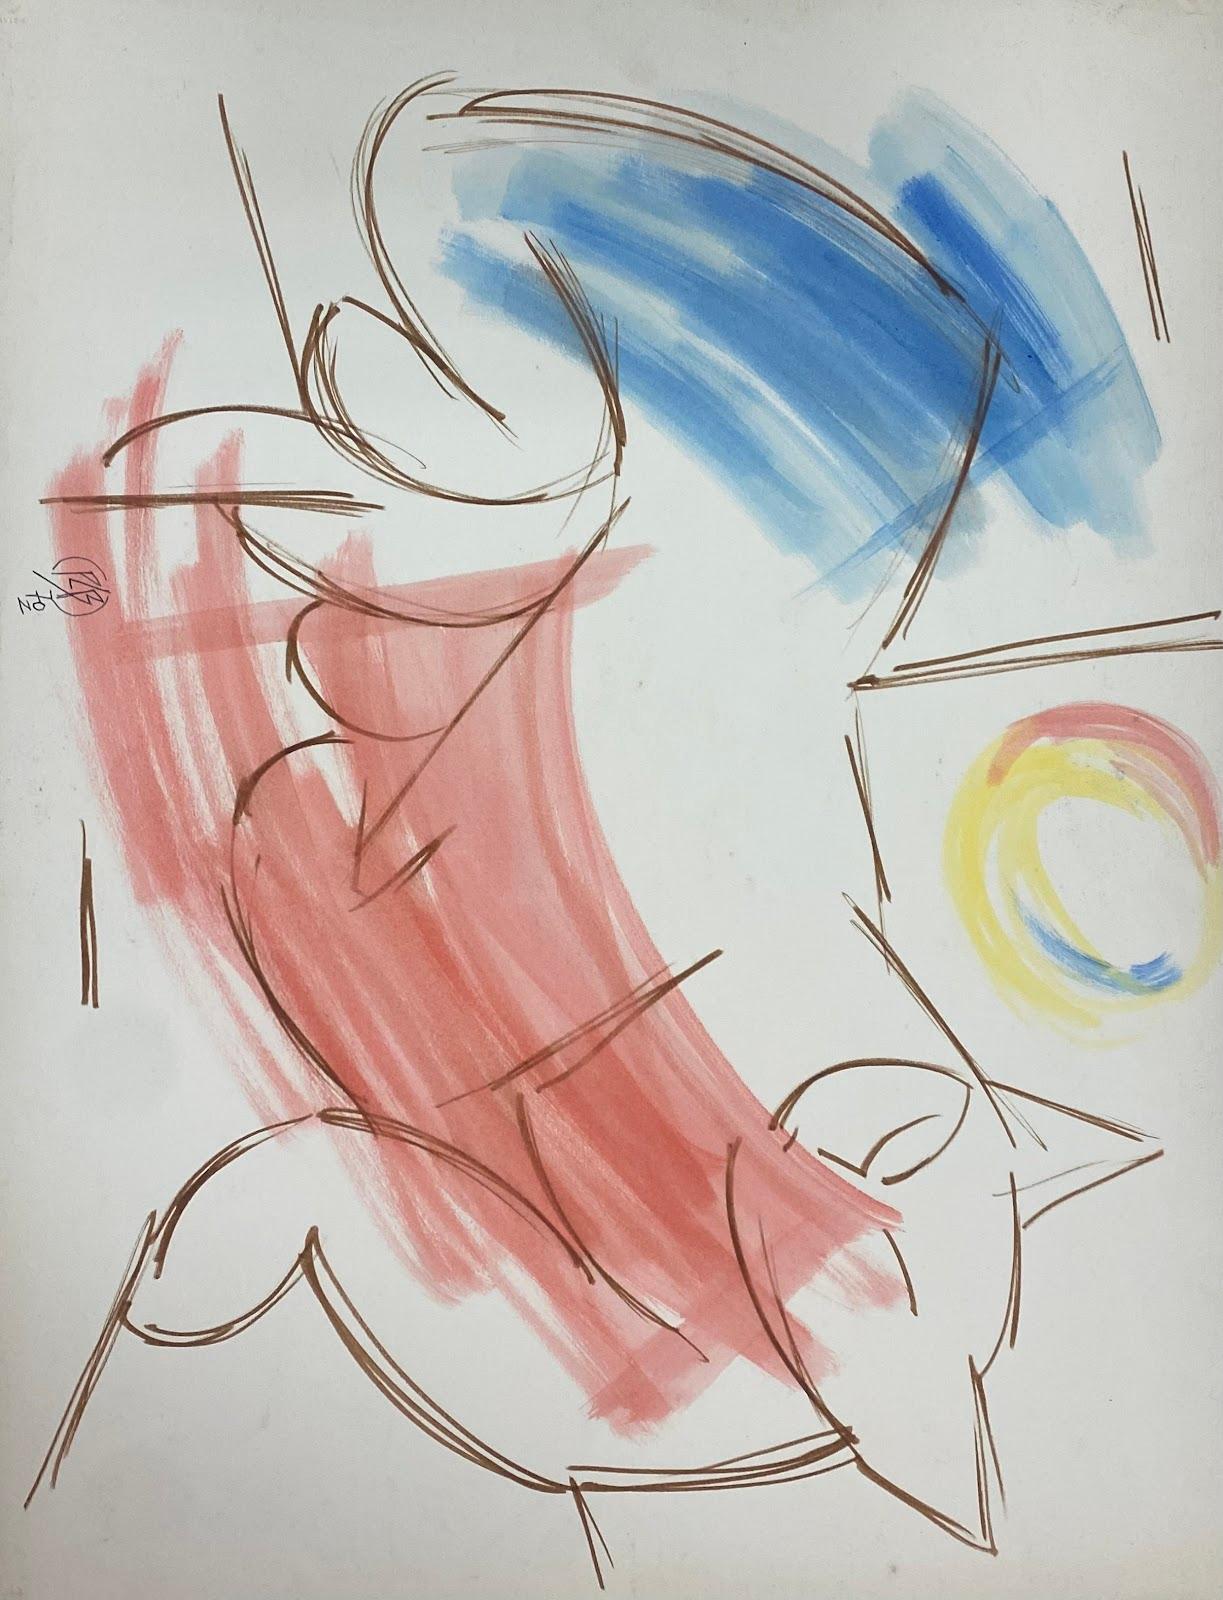 by Paul-Louis Bolot (French 1918-2003)
signed
original gouache painting on thick paper/ card
unframed
condition: very good and sound; the edges have a few curls and scuffs/ edge tears which should all cover once flattened or framed. 
provenance: all